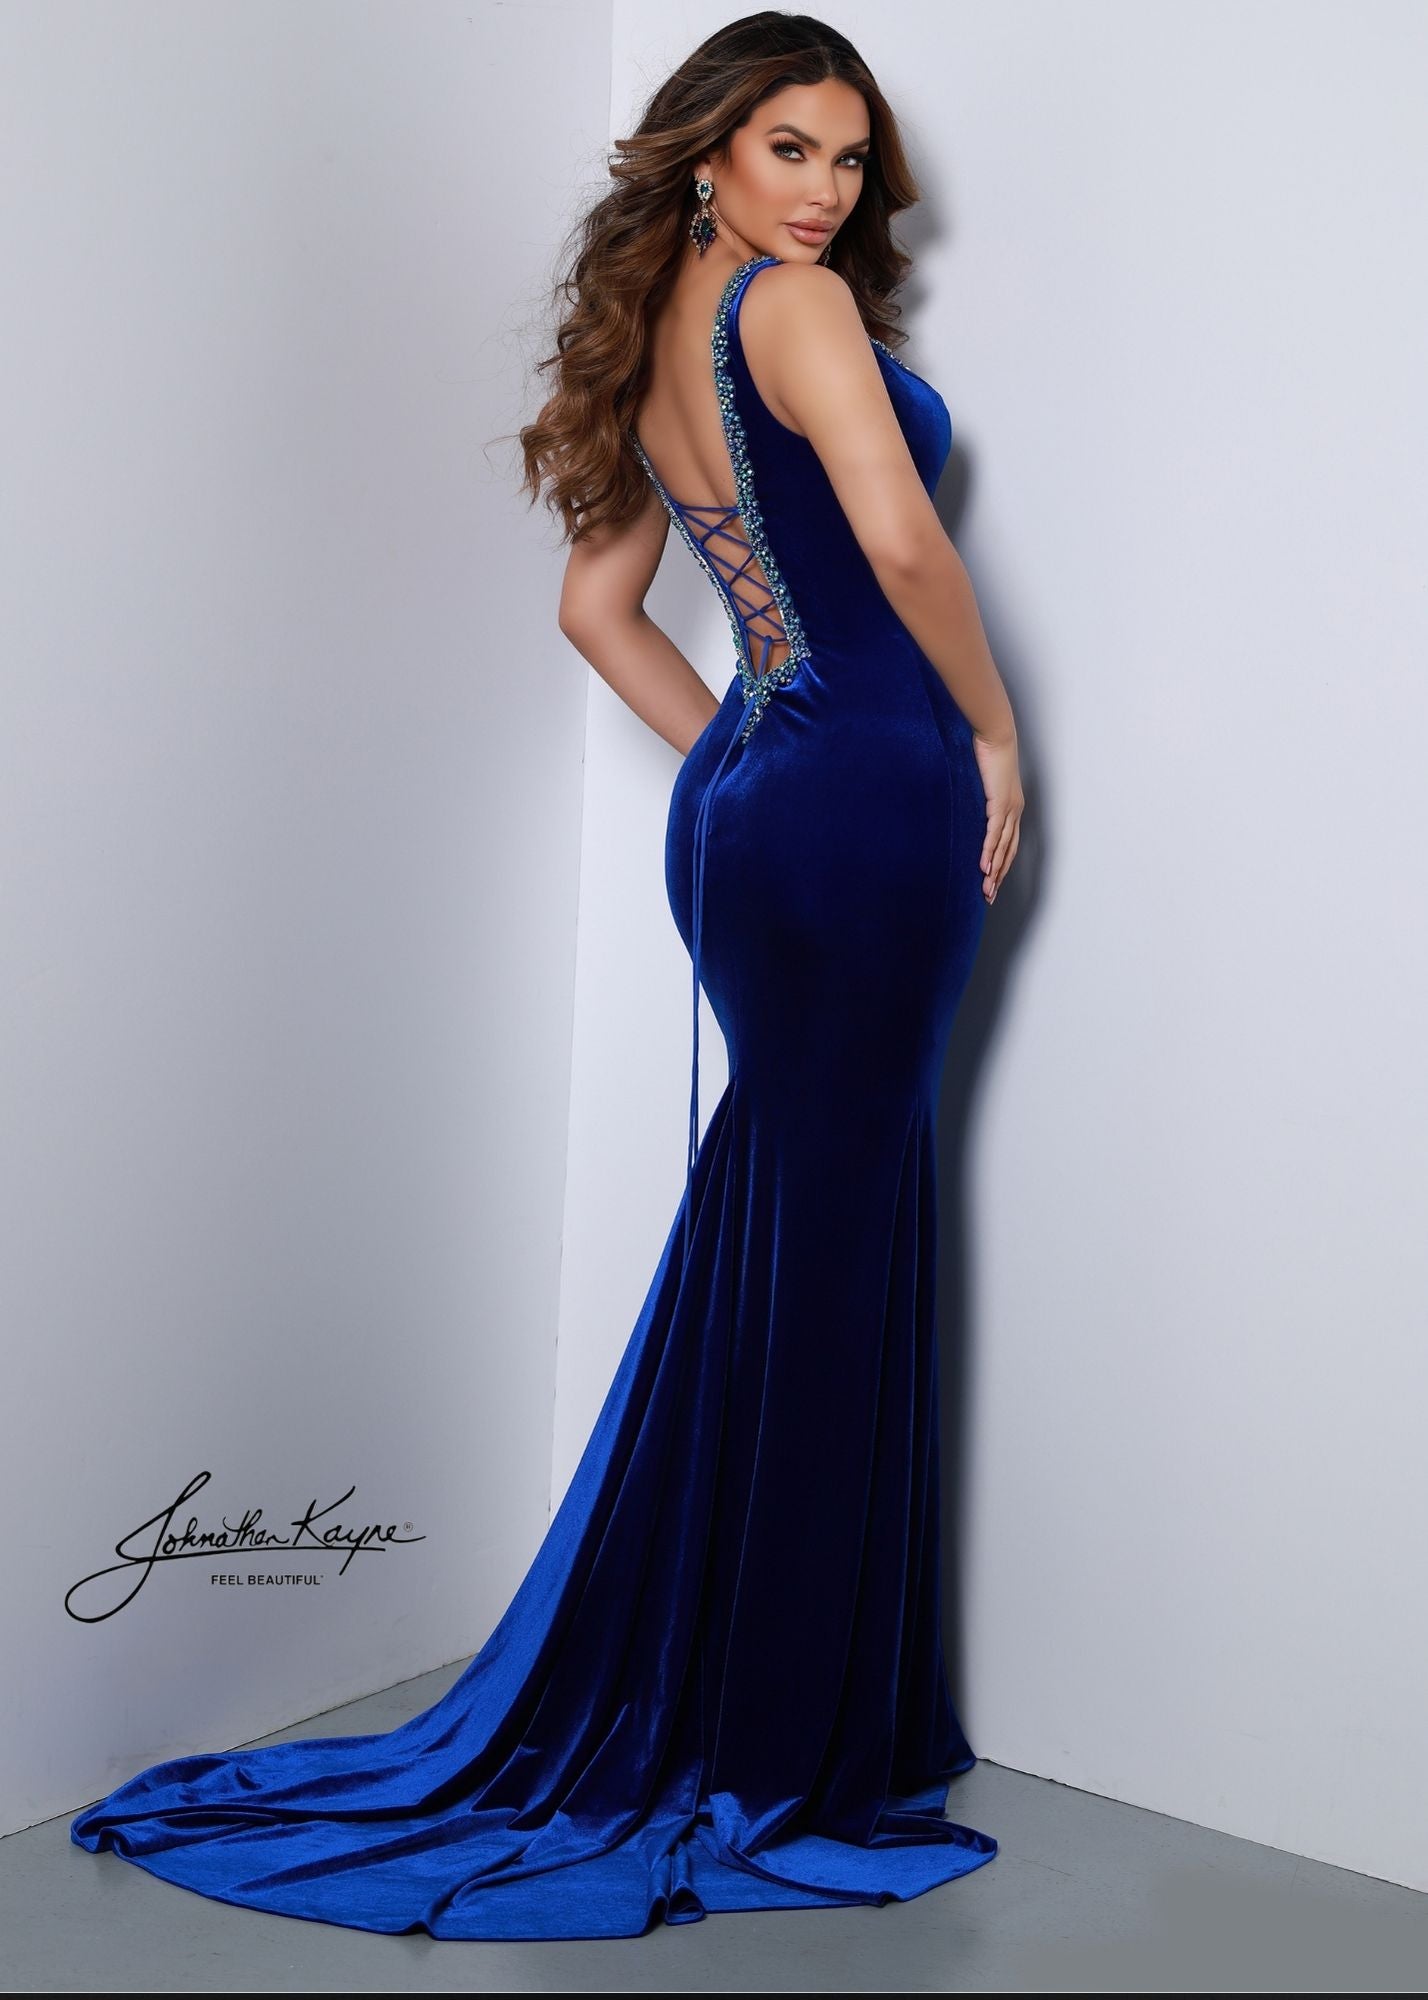 Look stunning in the Johnathan Kayne 2534 gown. Crafted from sleek stretch velvet, this gown features a V neckline and low back adorned in sparkling rhinestones. The corset back ensures a perfect fit. Perfect for special occasions, this piece is sure to make you shine.